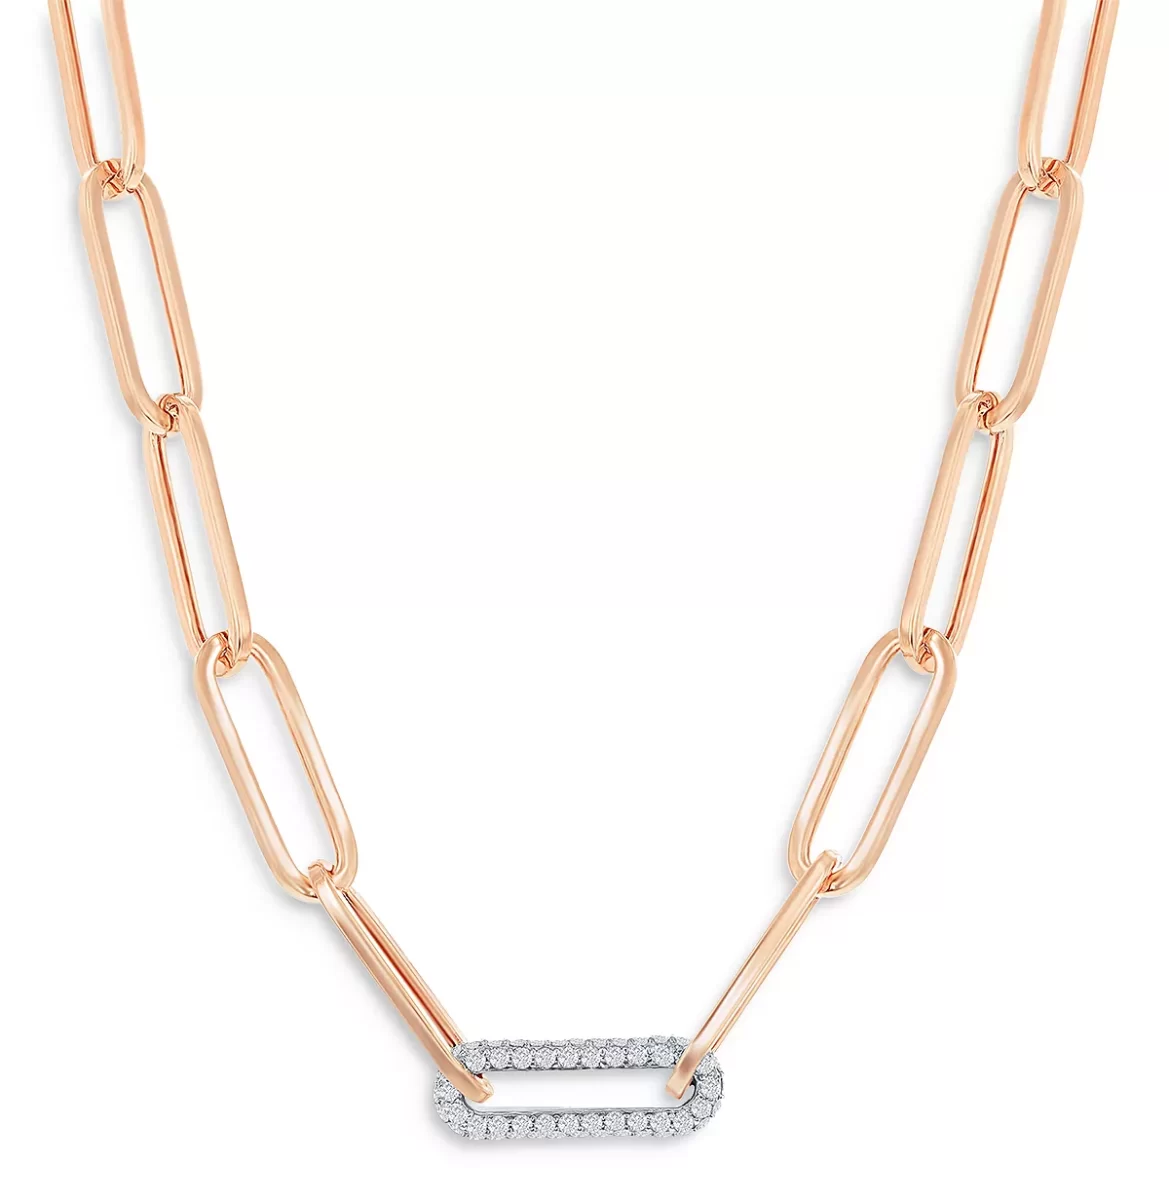 bloomingdales Diamond Paperclip Necklace in 14K White Rose Gold 0.70 ct. t.w. 100 Exclusive